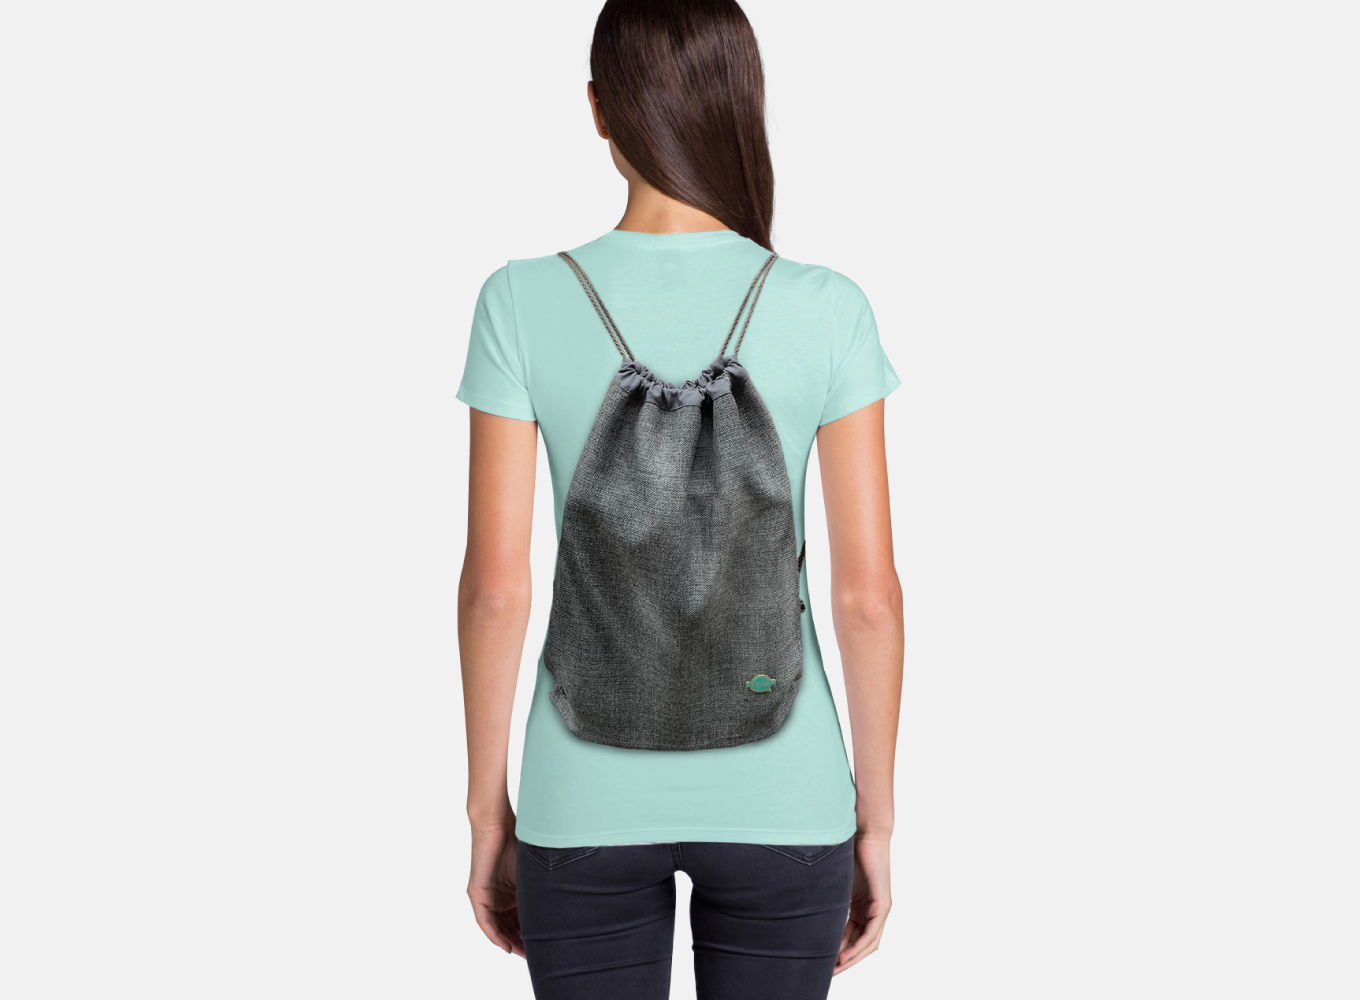 Speech Therapy Tote